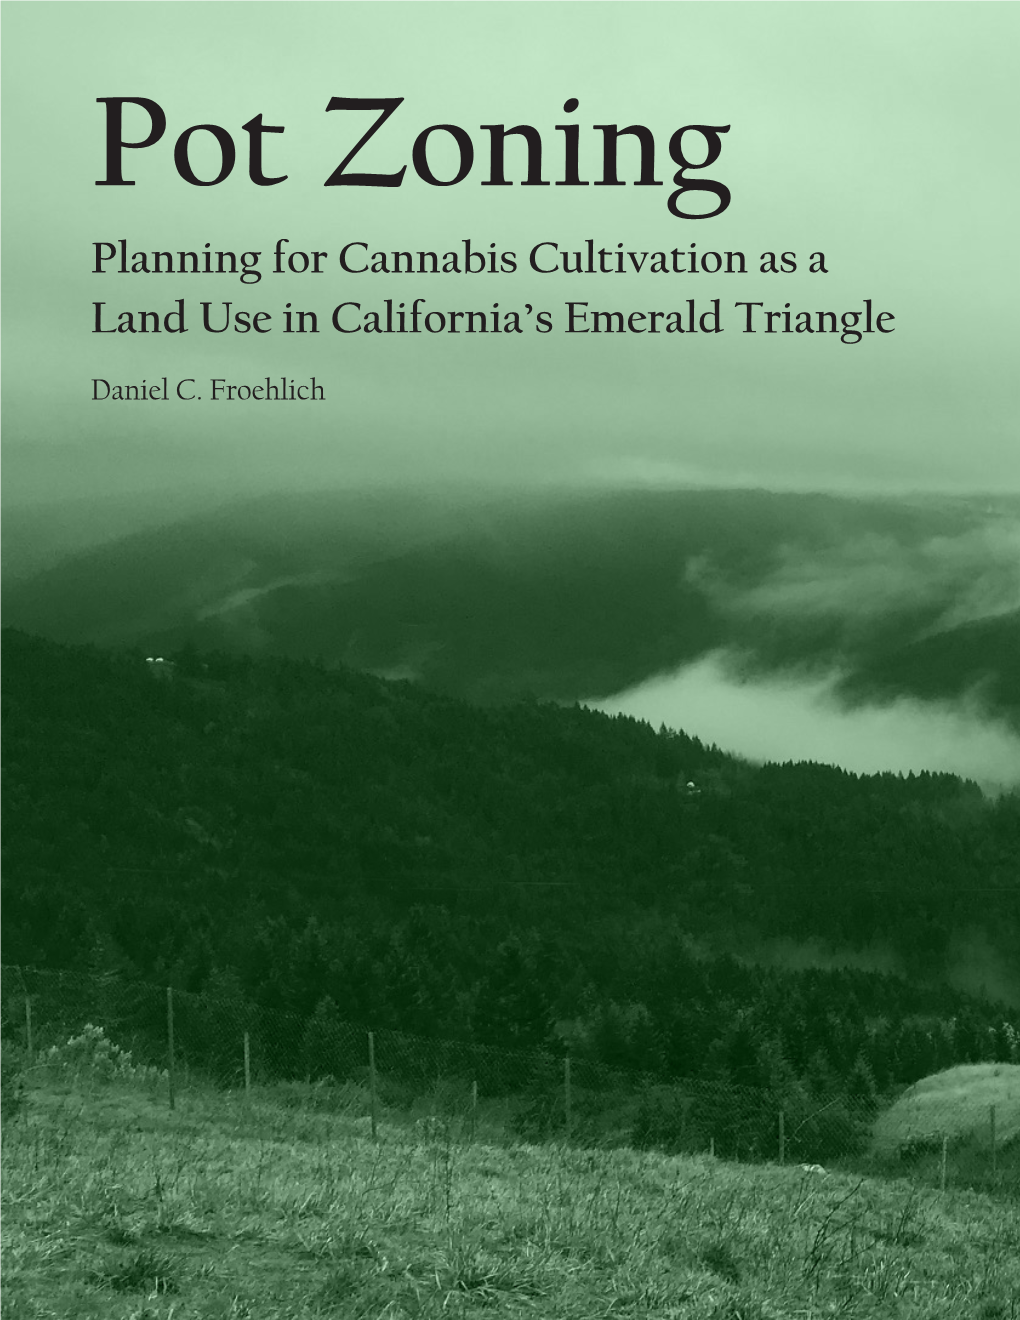 Planning for Cannabis Cultivation As a Land Use in California's Emerald